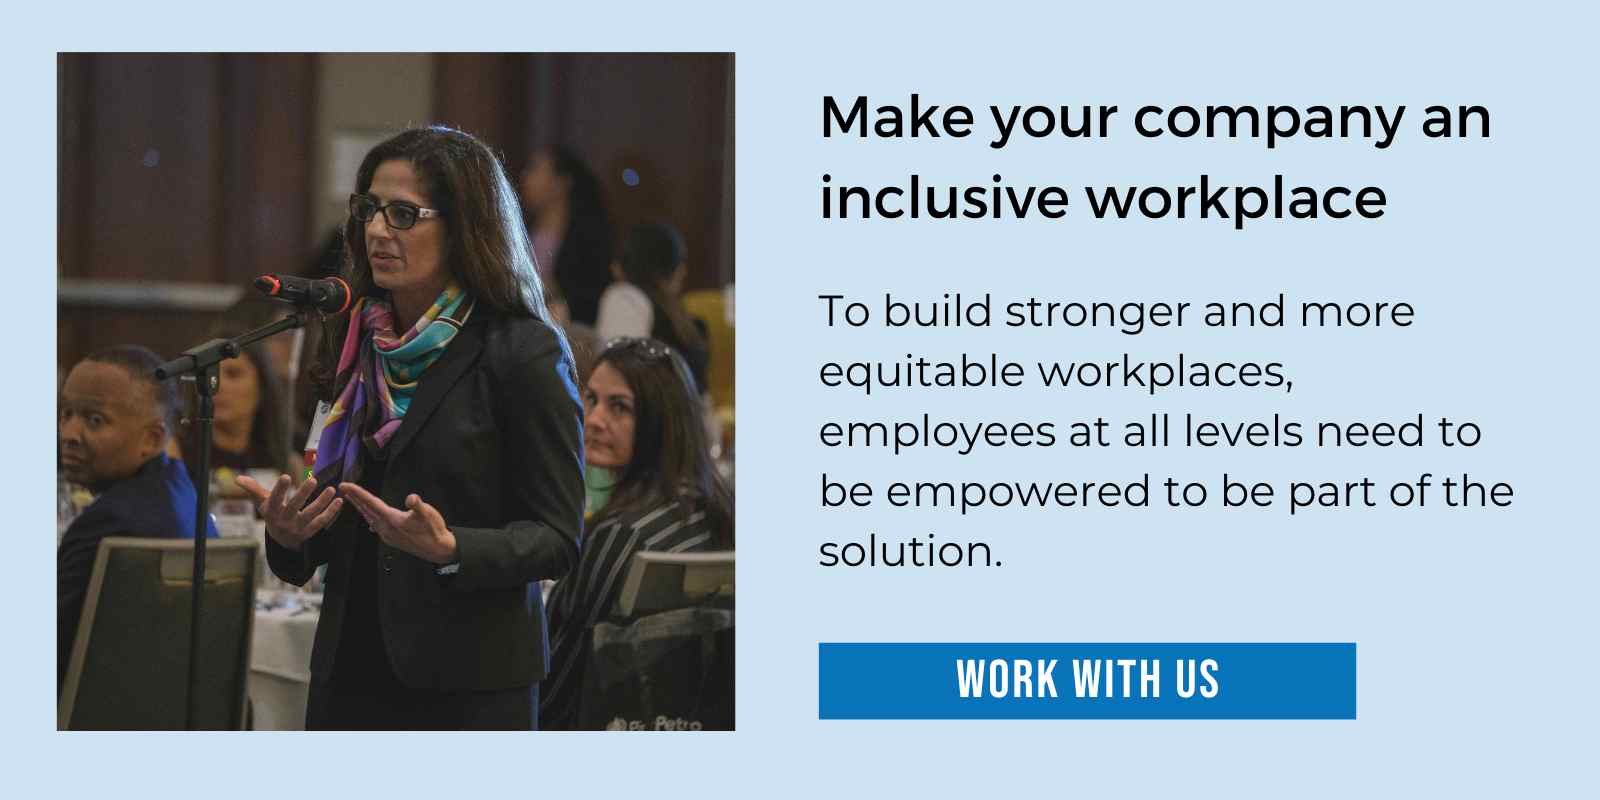 To build stronger and more equitable workplaces, employees at all levels need to be empowered to be part of the solution. Lean In’s employee training can help. 50 Ways to Fight Bias takes the gues